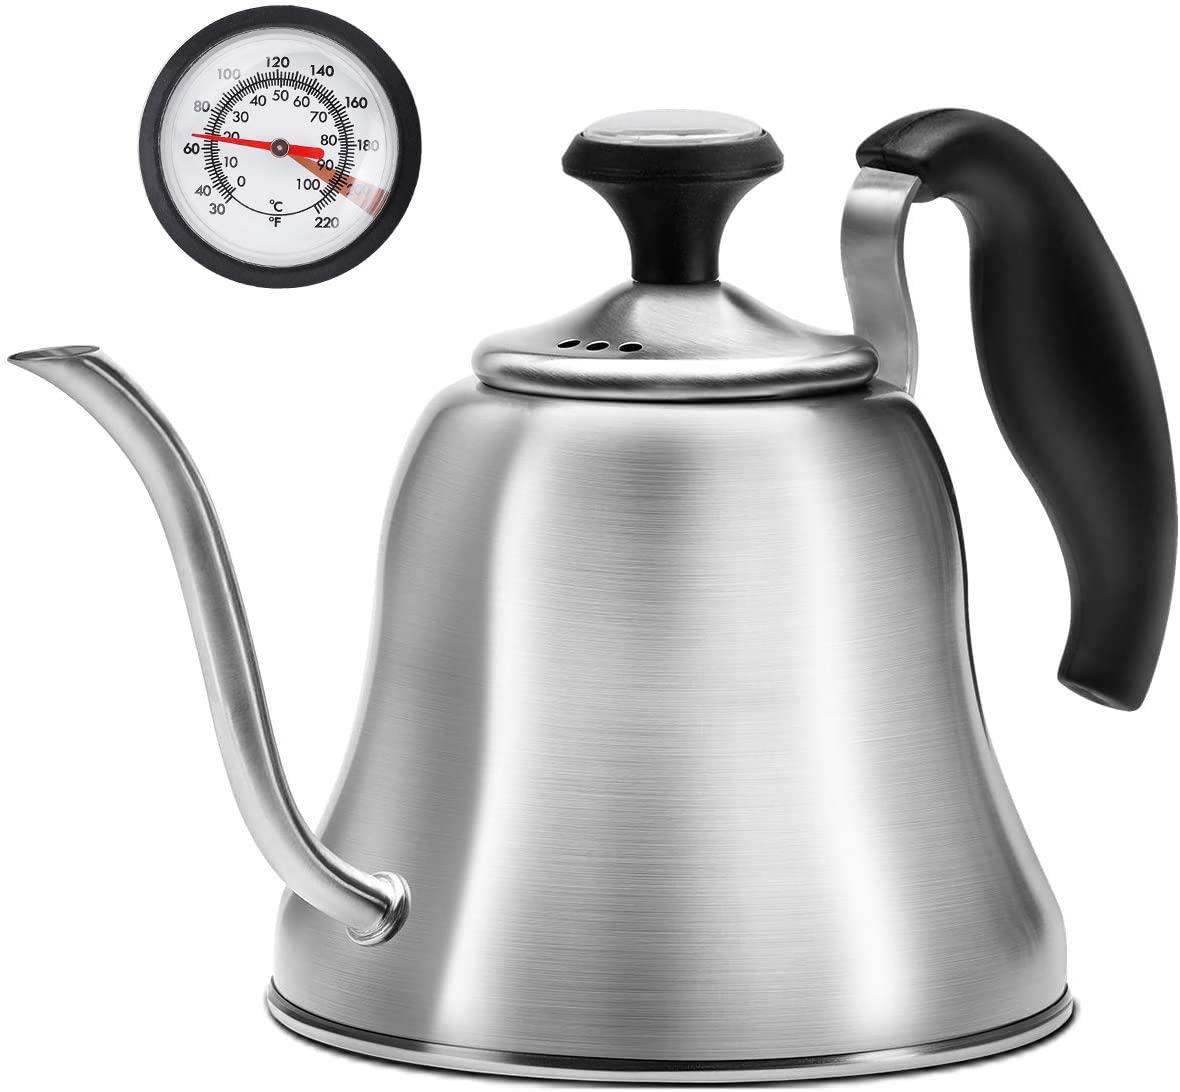 Unbreakable Gooseneck Kettle for Drip Coffee 20oz Pour Over Coffee Kettle Tea Kettle for Stove Top,600ml/20oz Glass Coffee Kettle with Lid,Water